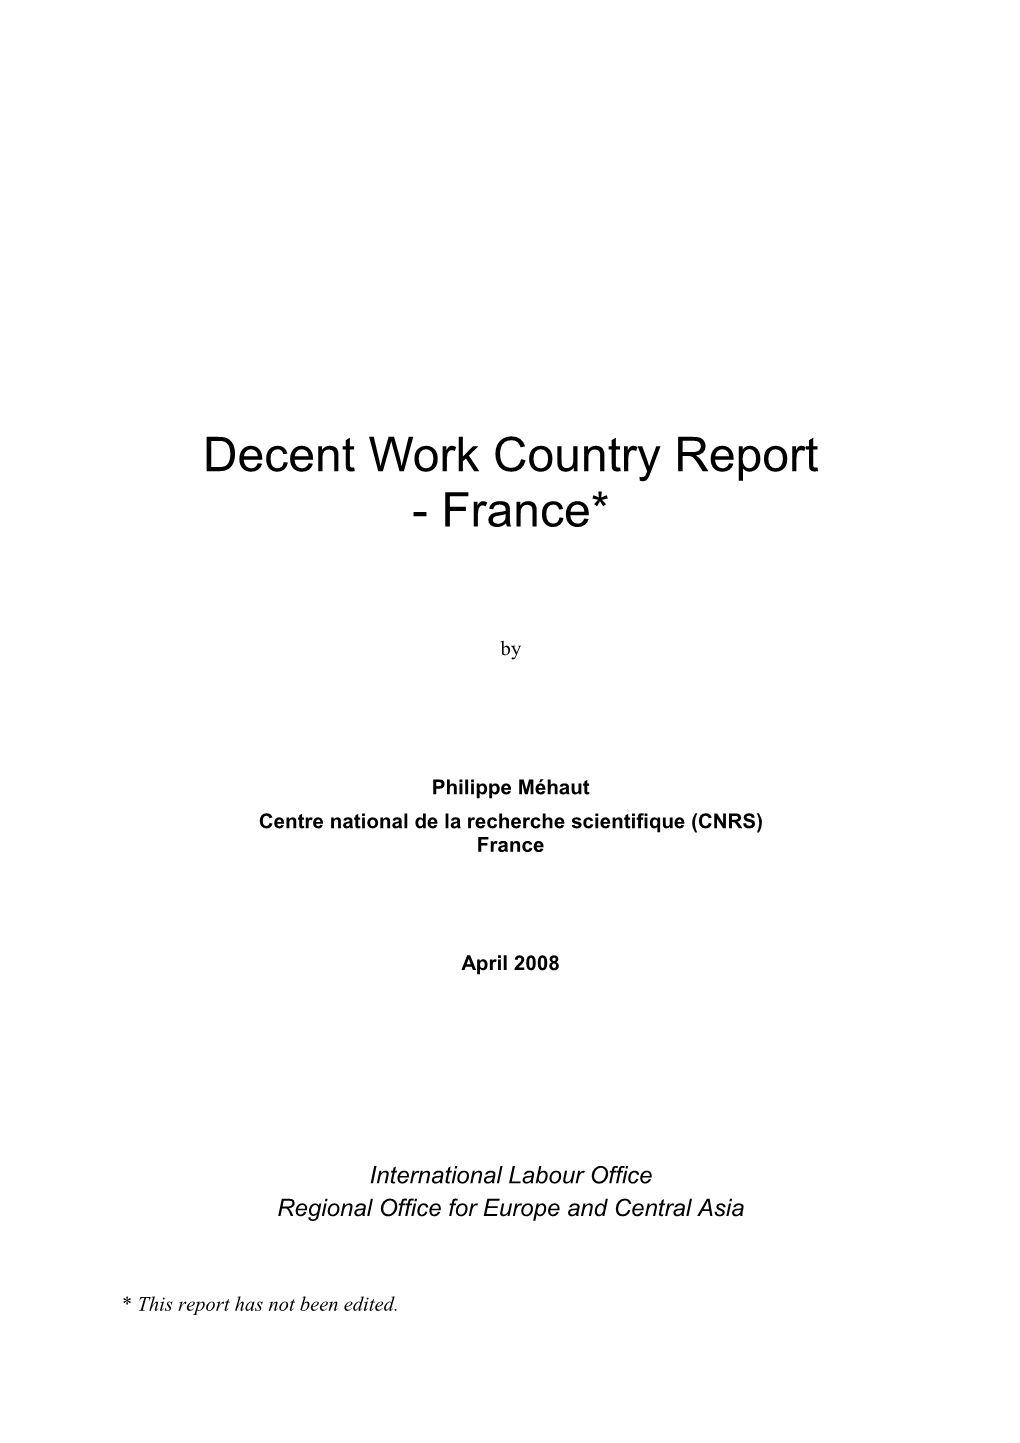 Outline of the French Report on Decent Work